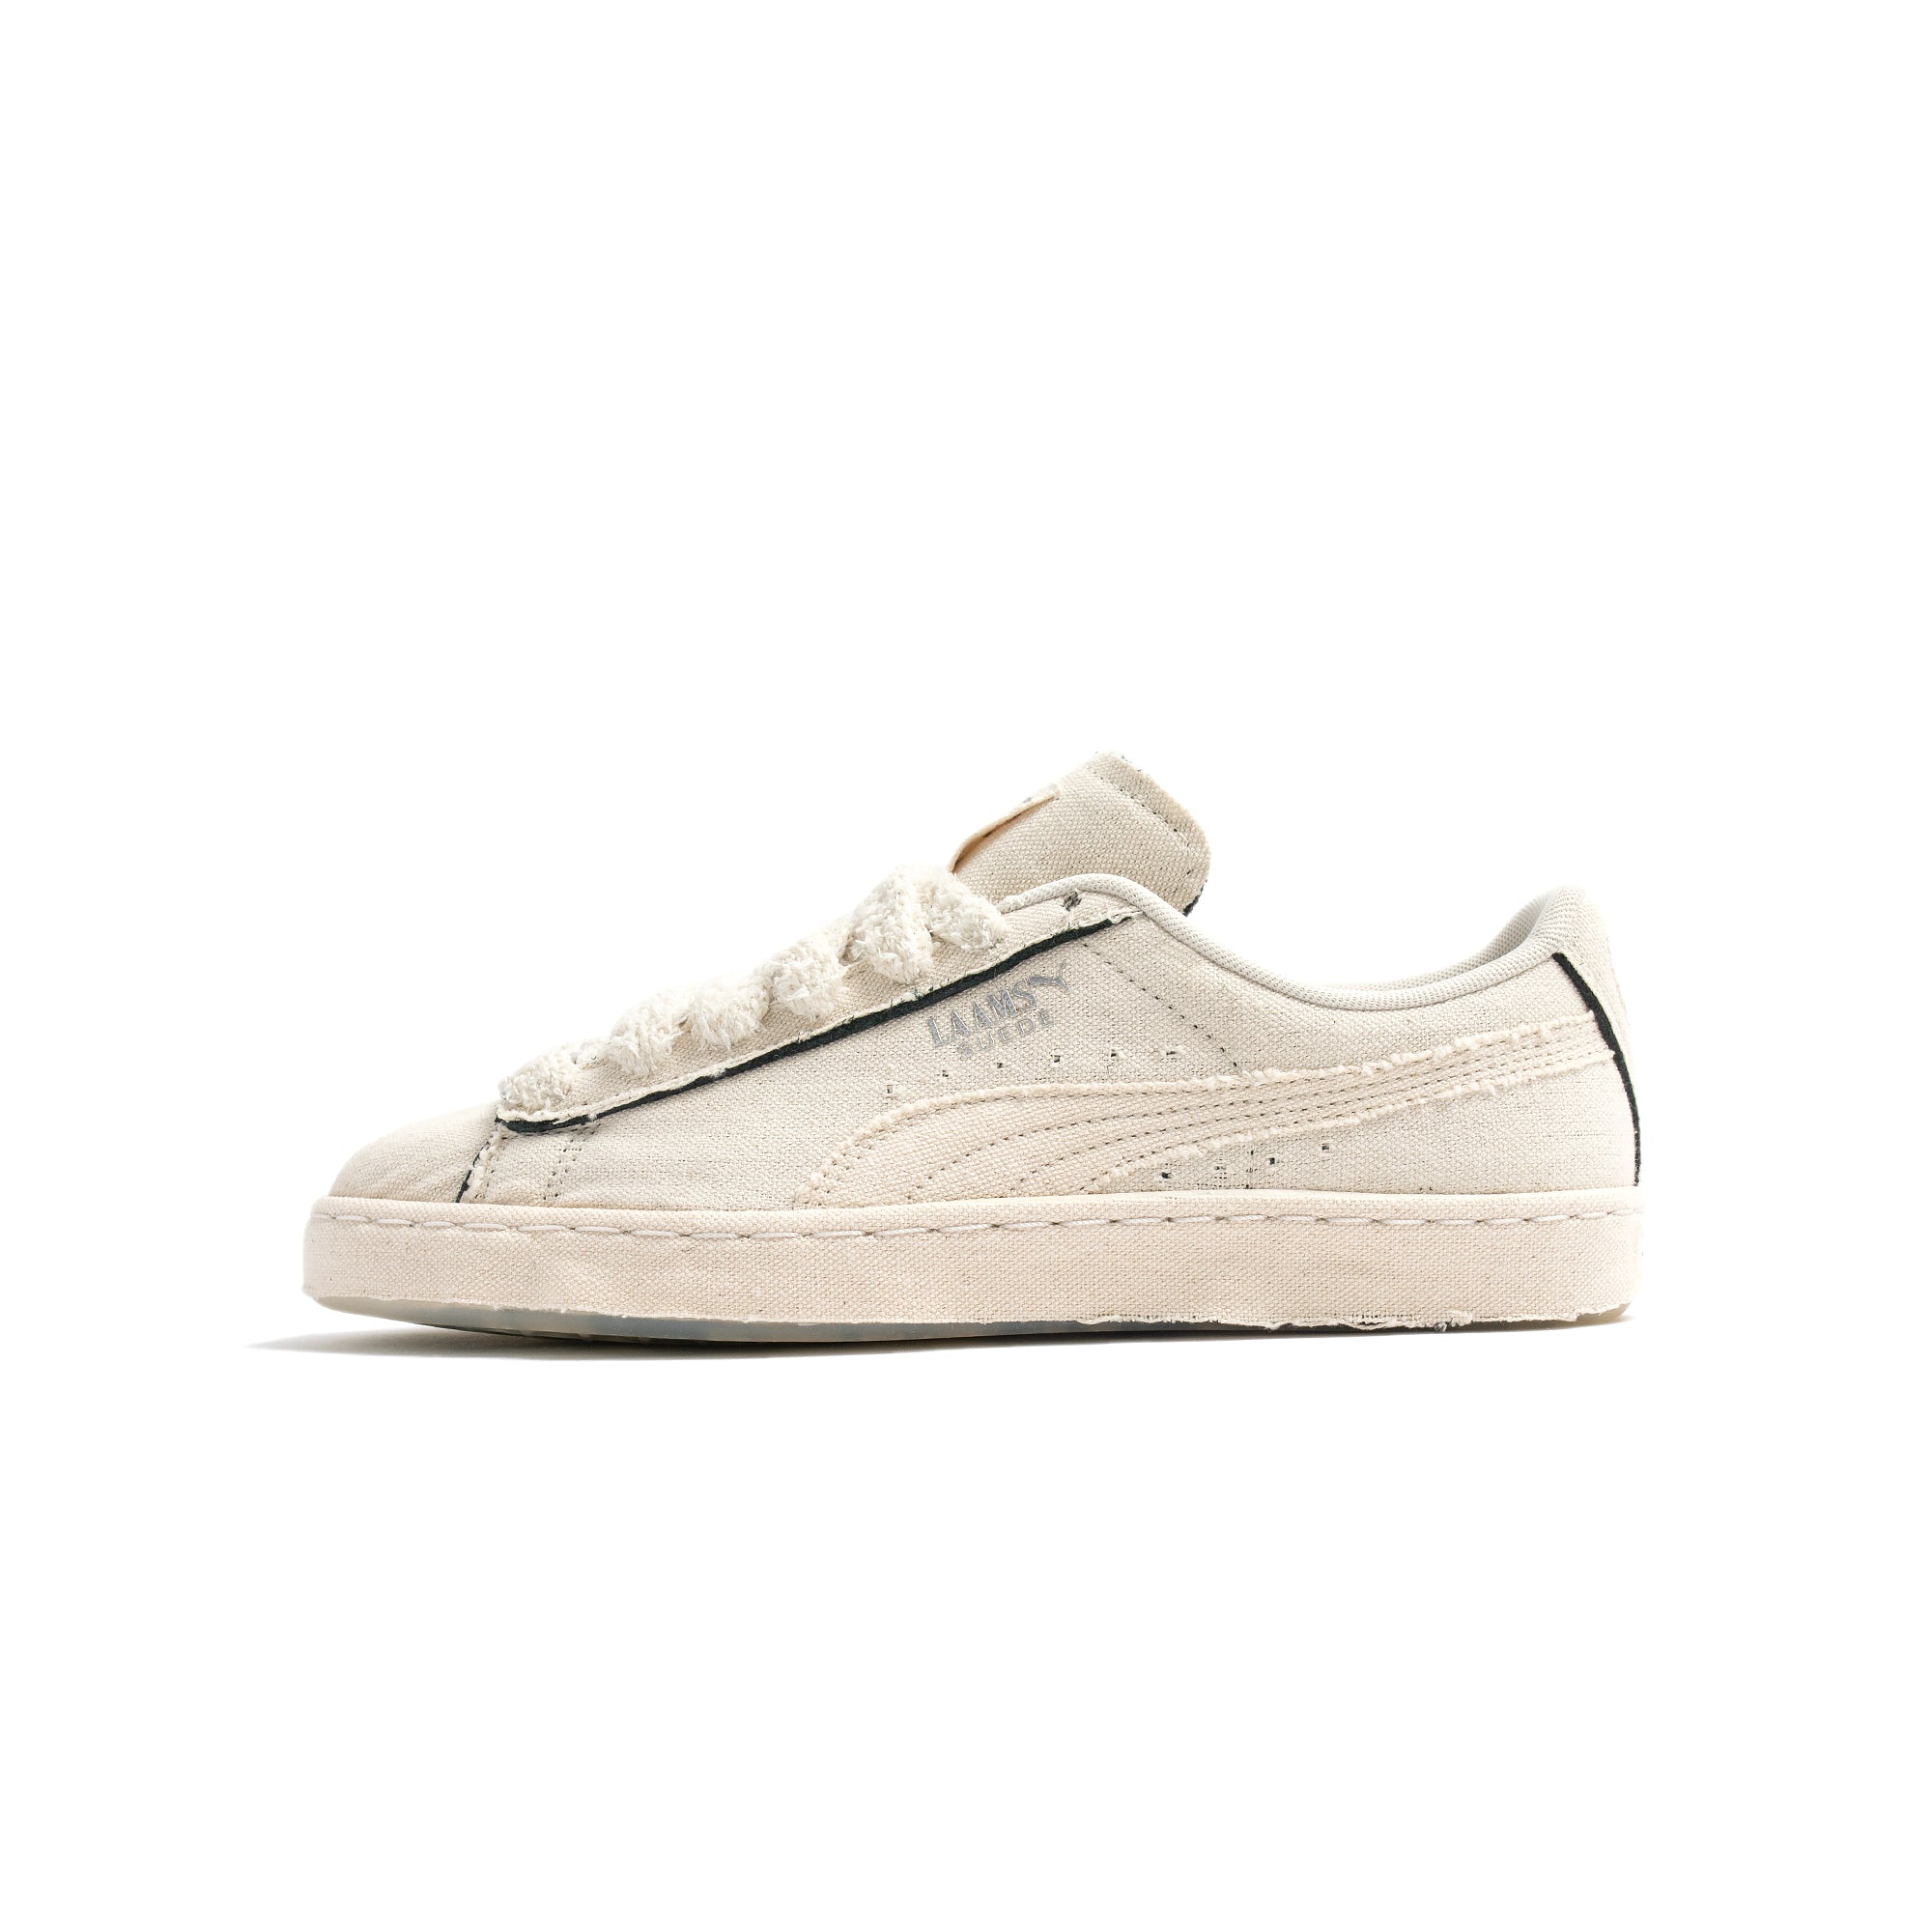 Puma x Laams Mens Suede Blank Canvas Shoes card image